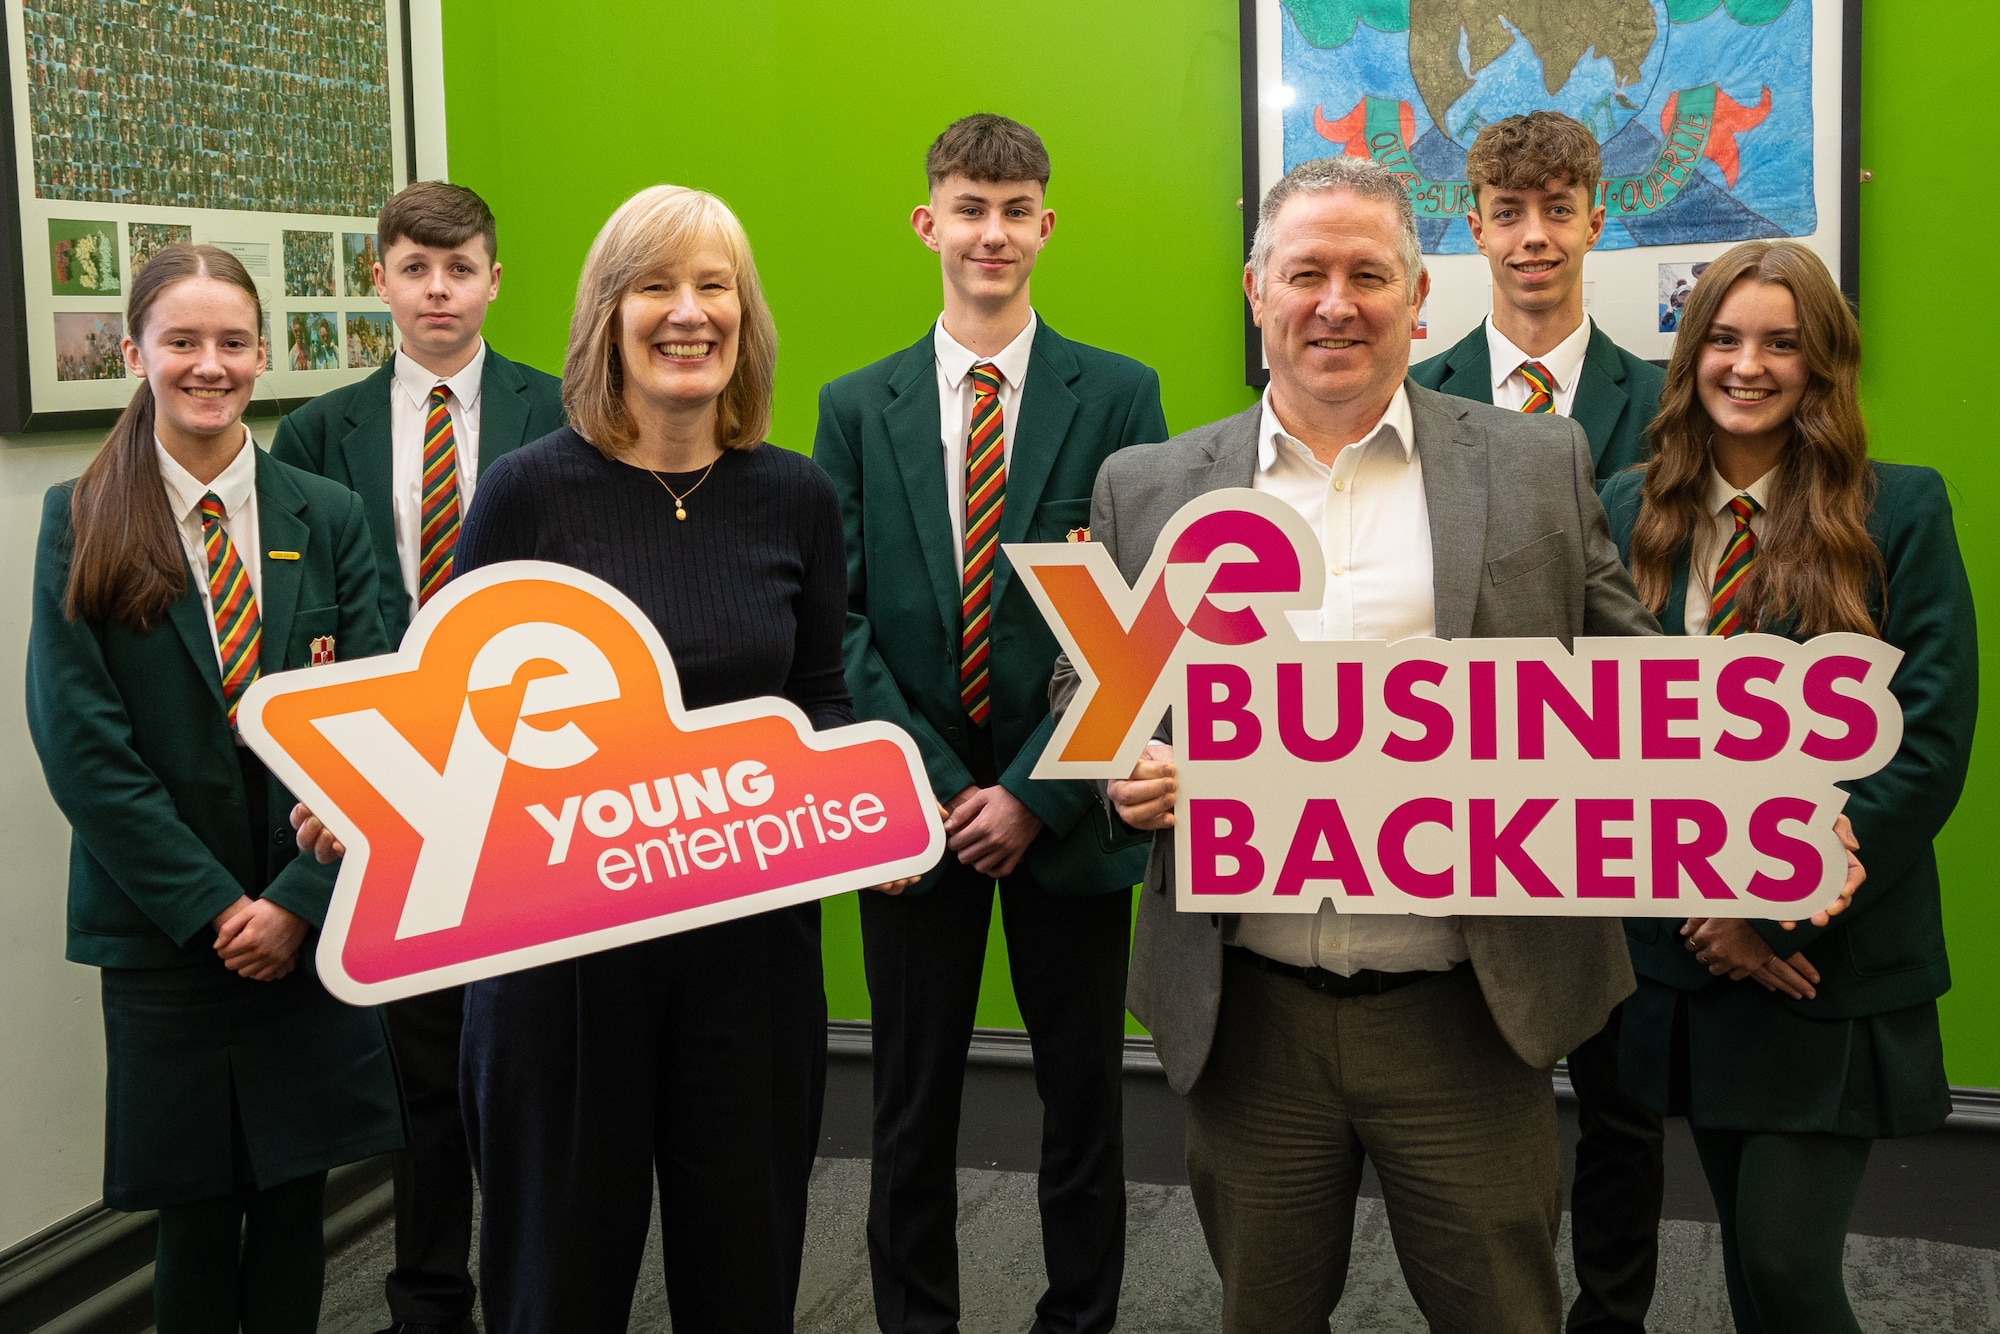 Young Enterprise campaign backed by ASSA Abloy